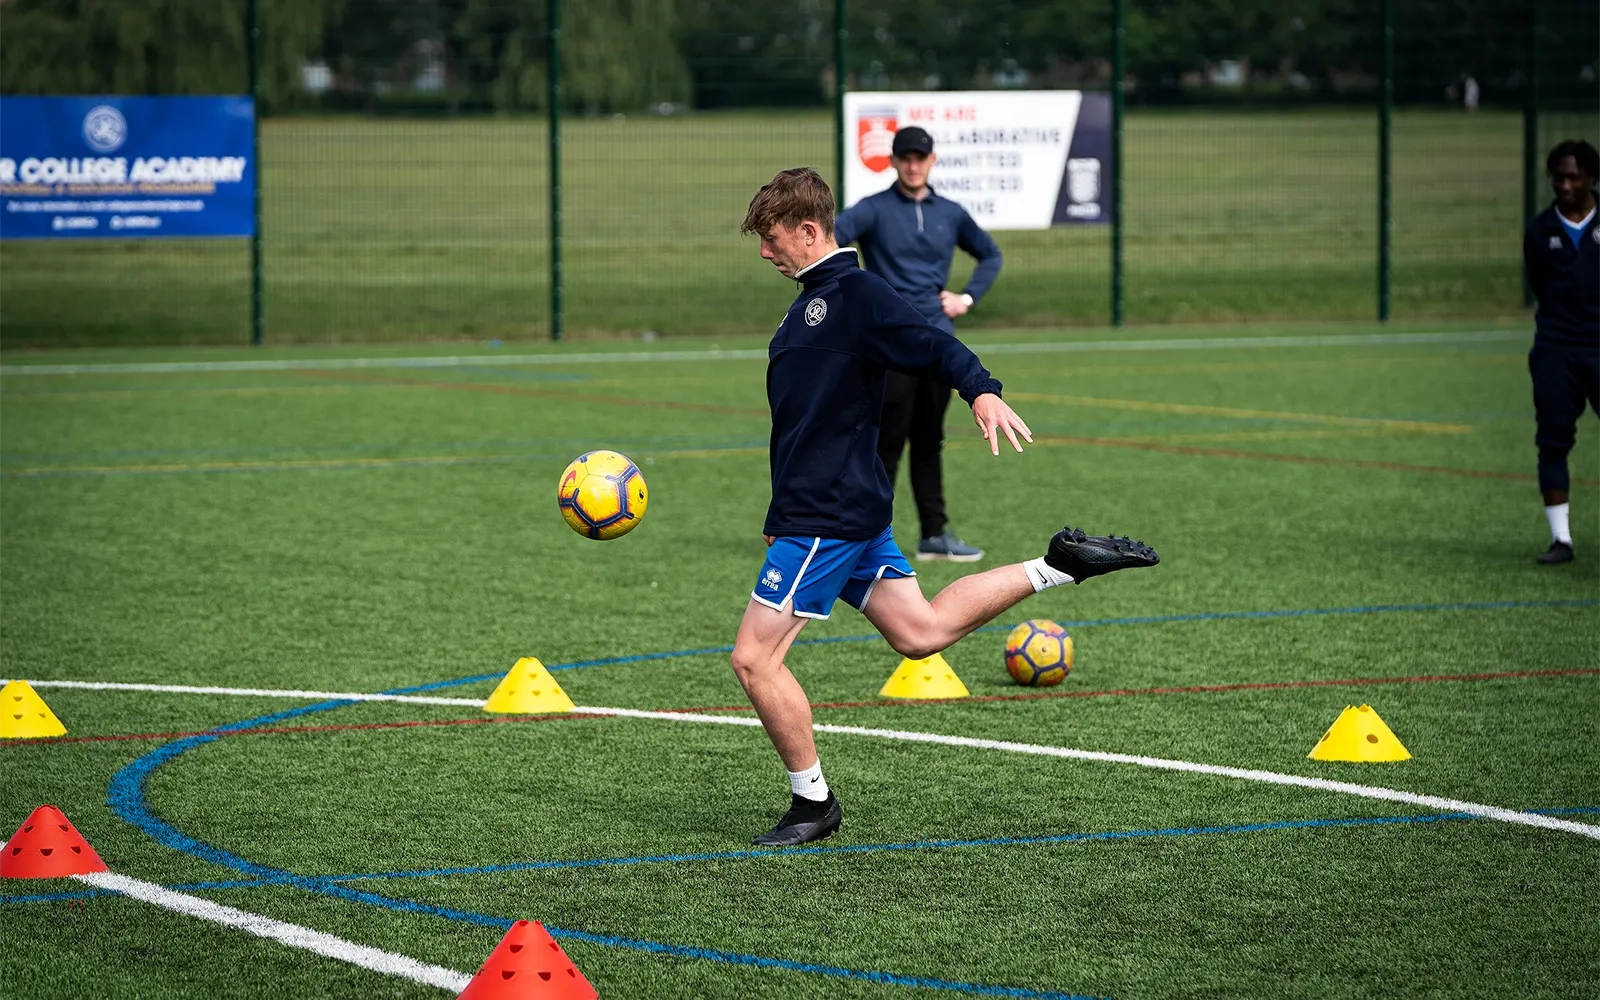 An action shot of a teenage boy during a football training session at a football pitch